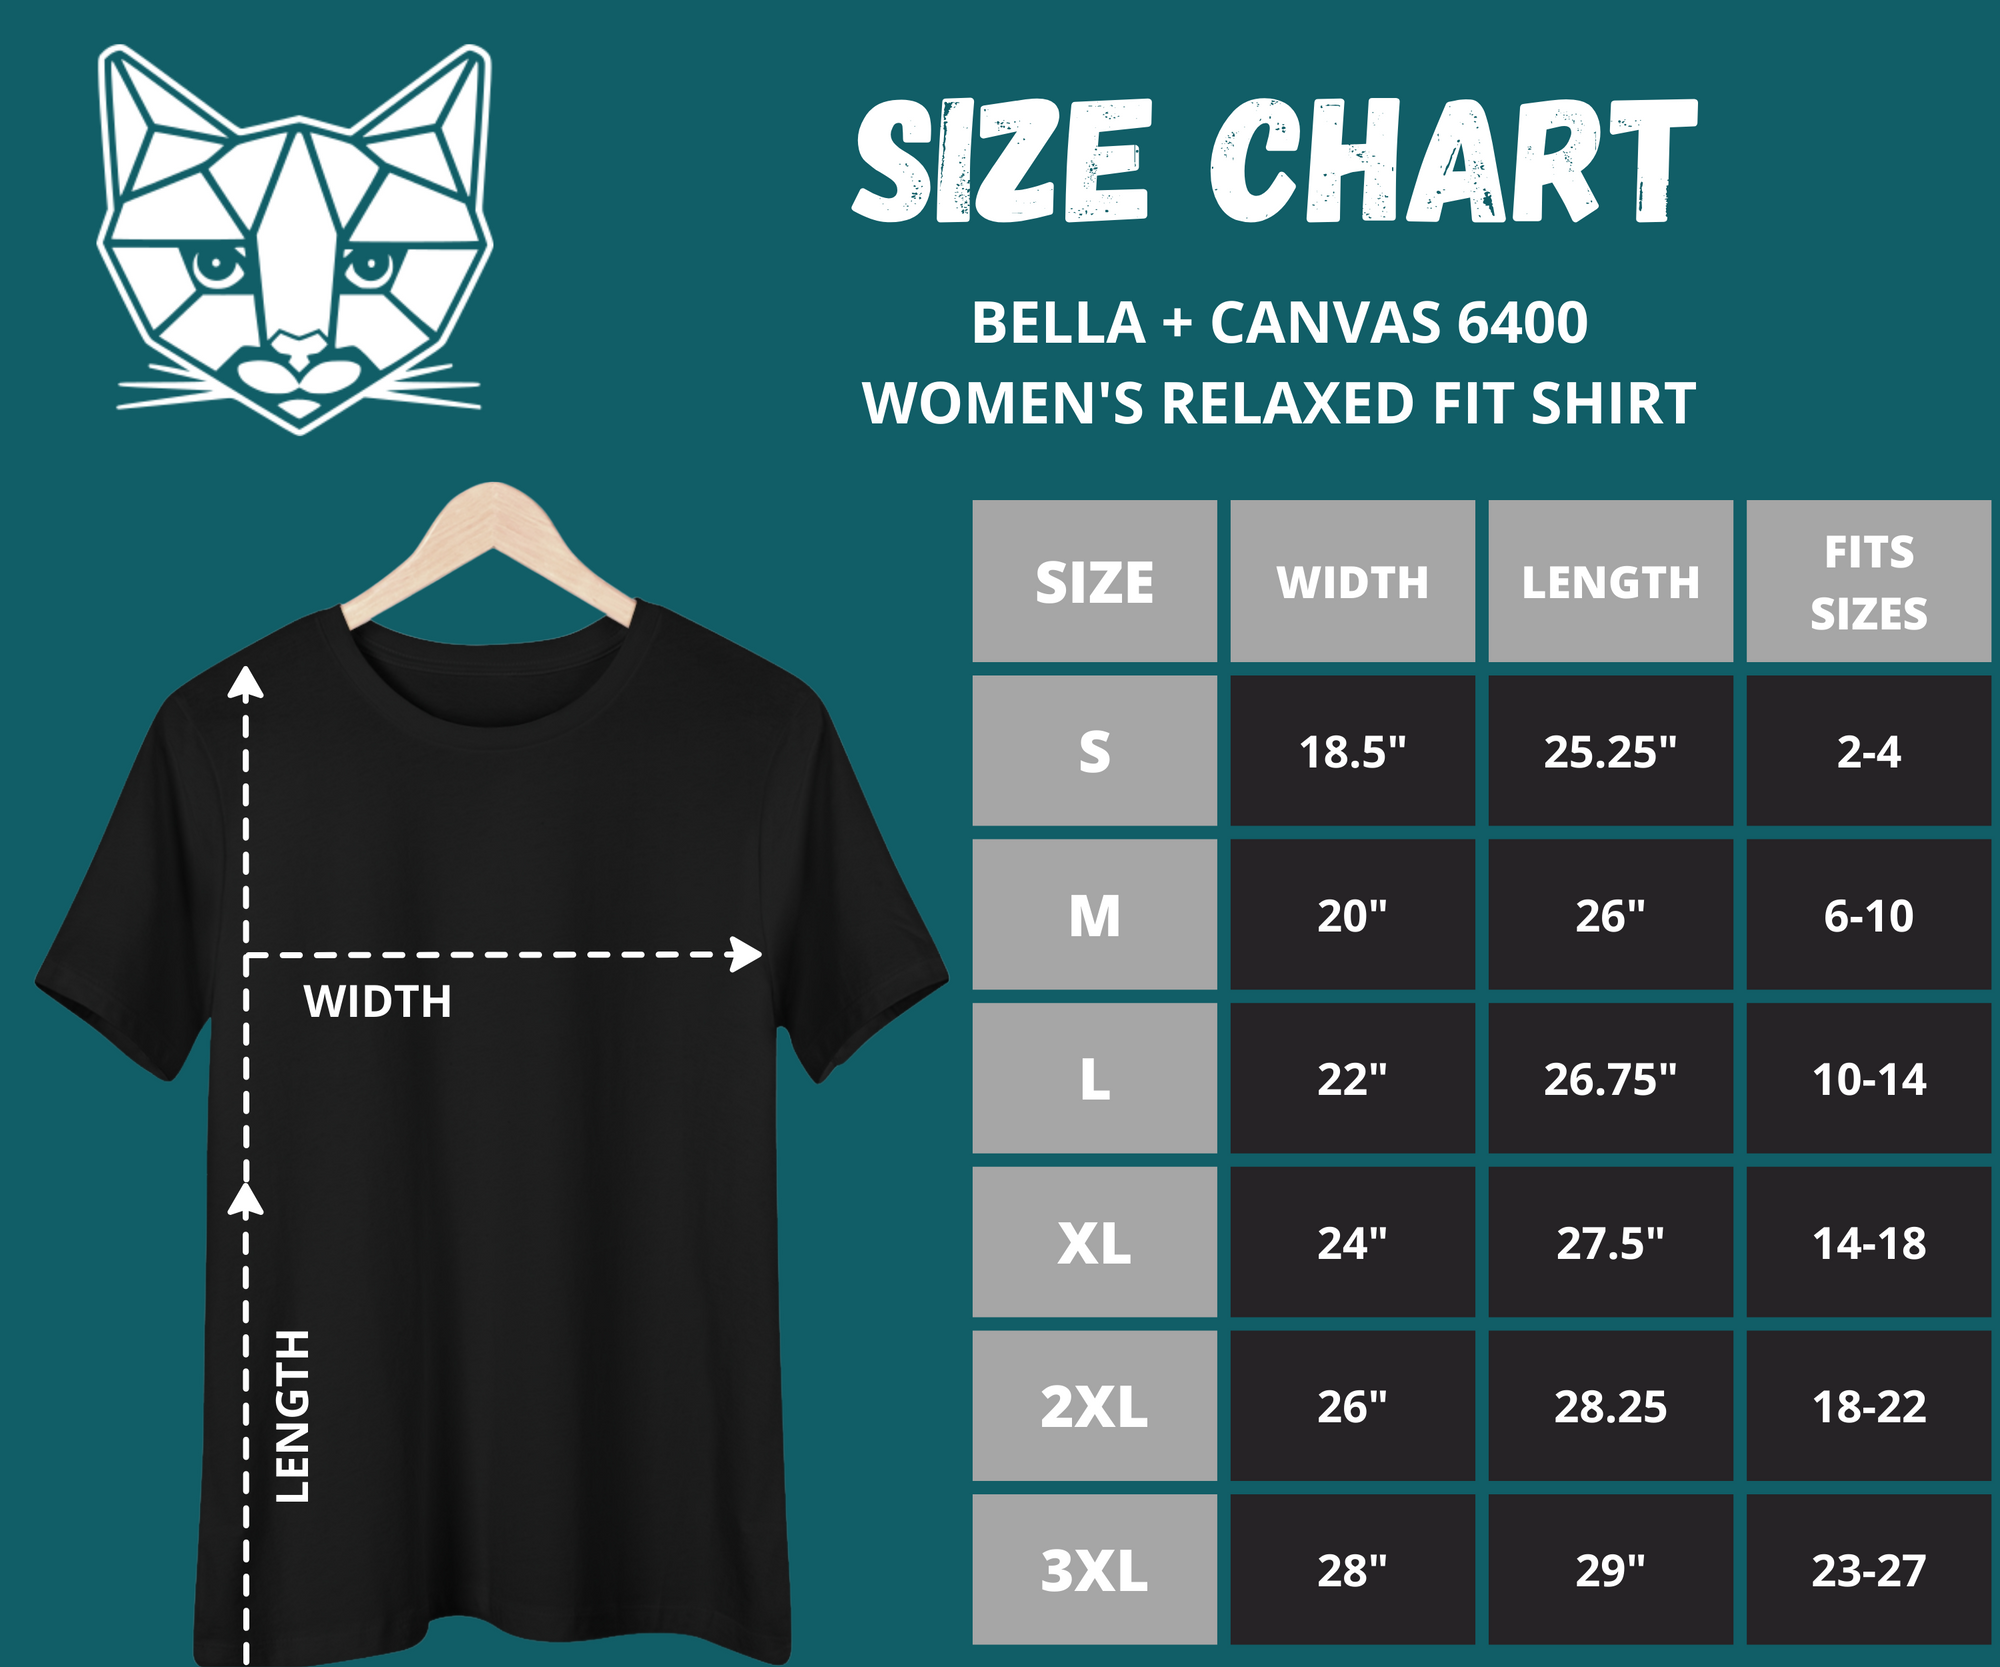 "ROAR CATS" - Fem Style, Relaxed Fit Tee